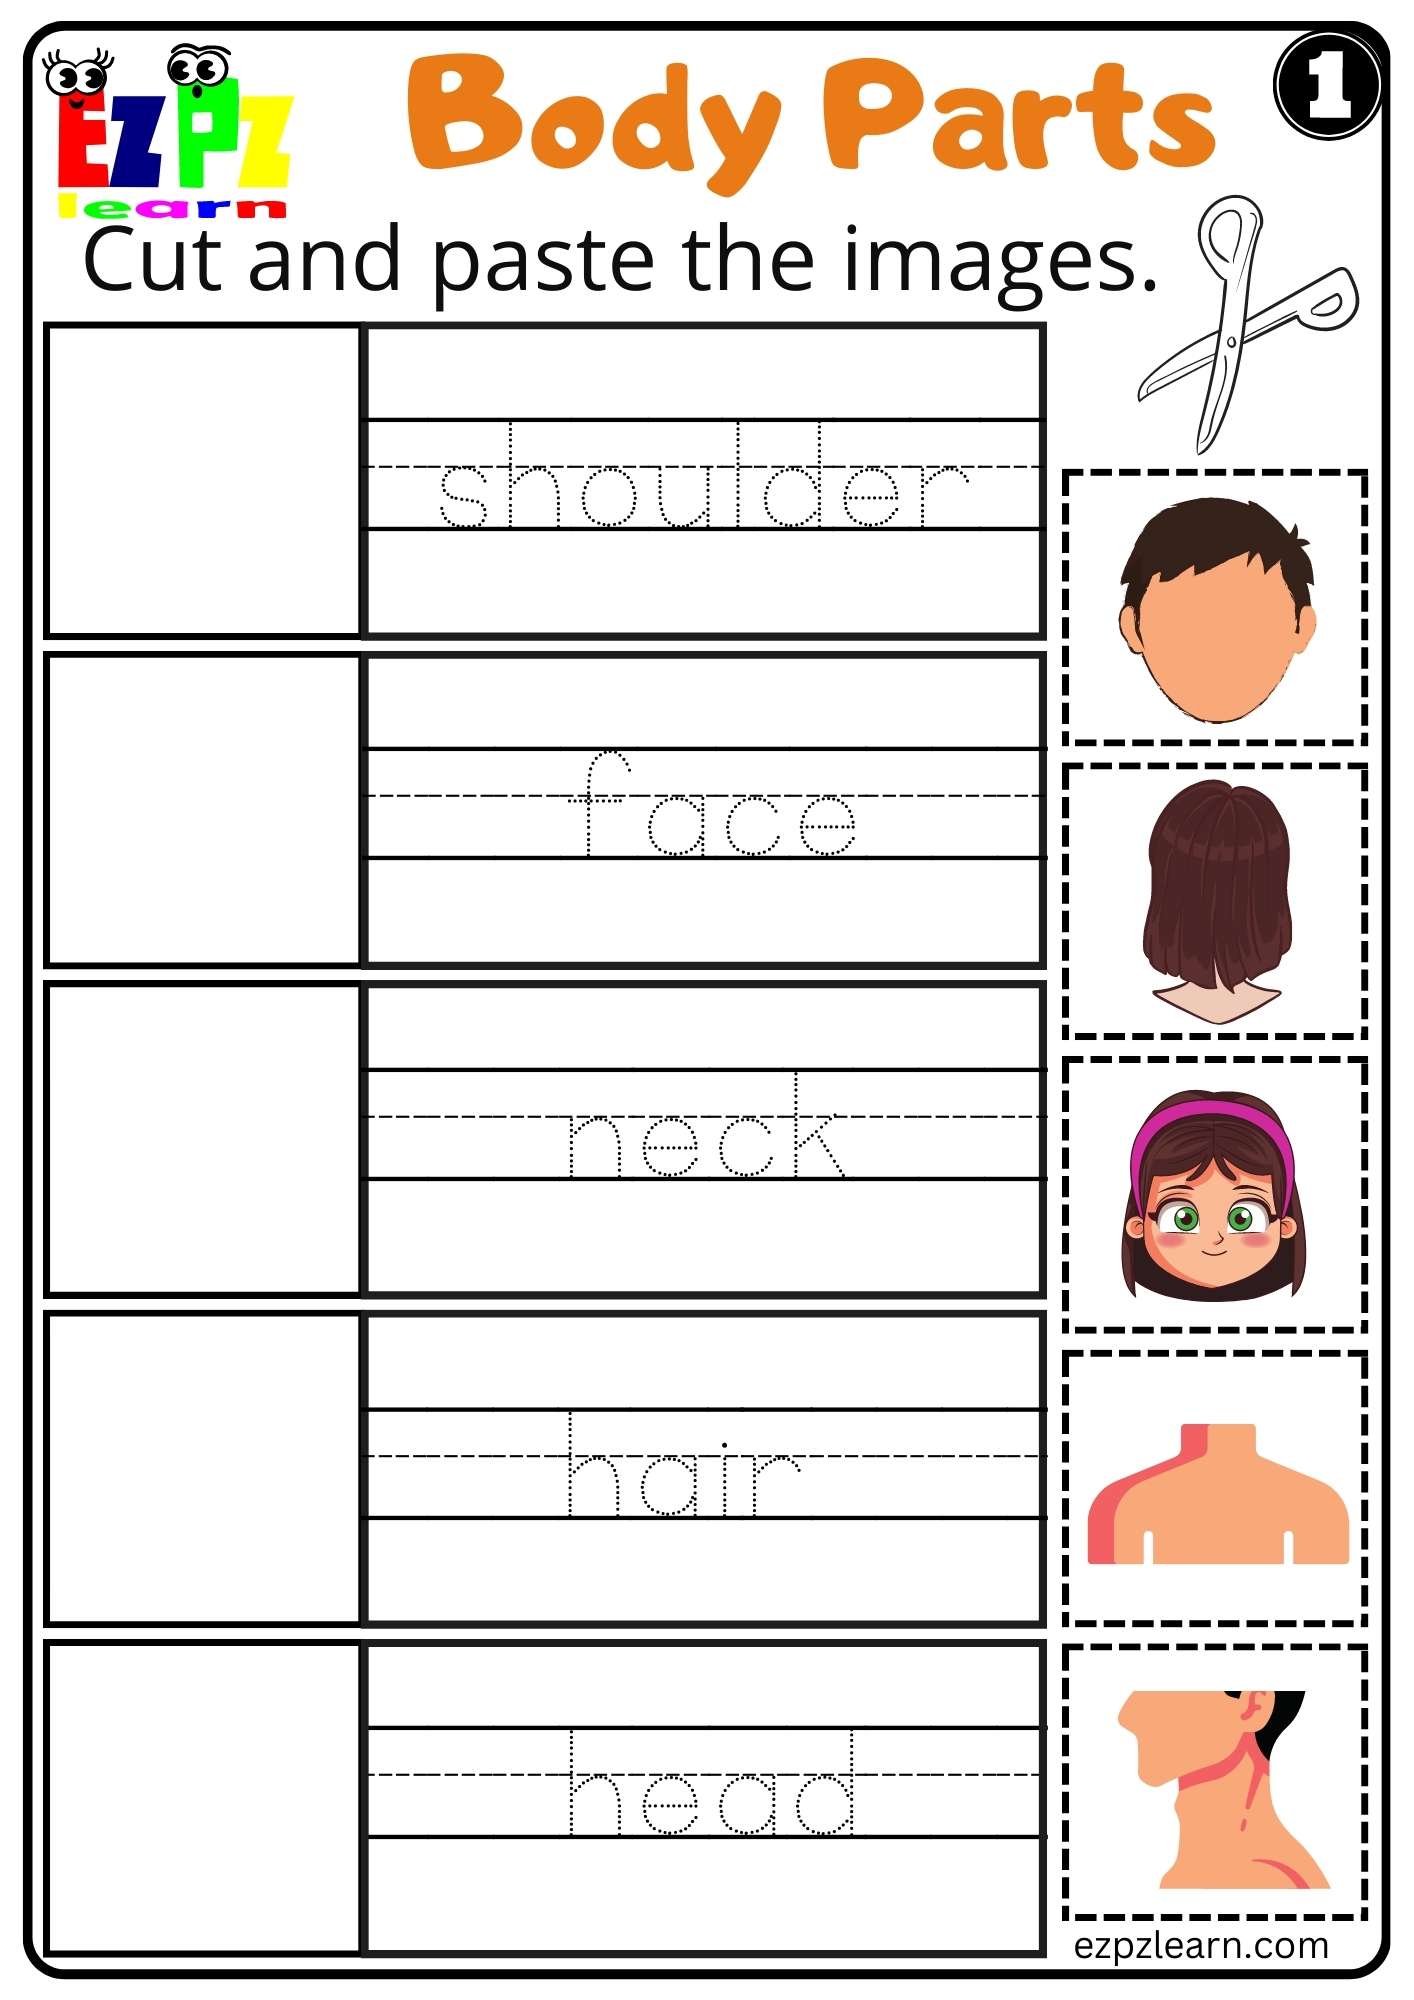 body-parts-cut-and-paste-worksheets-for-kids-and-esl-pdf-download-set-1